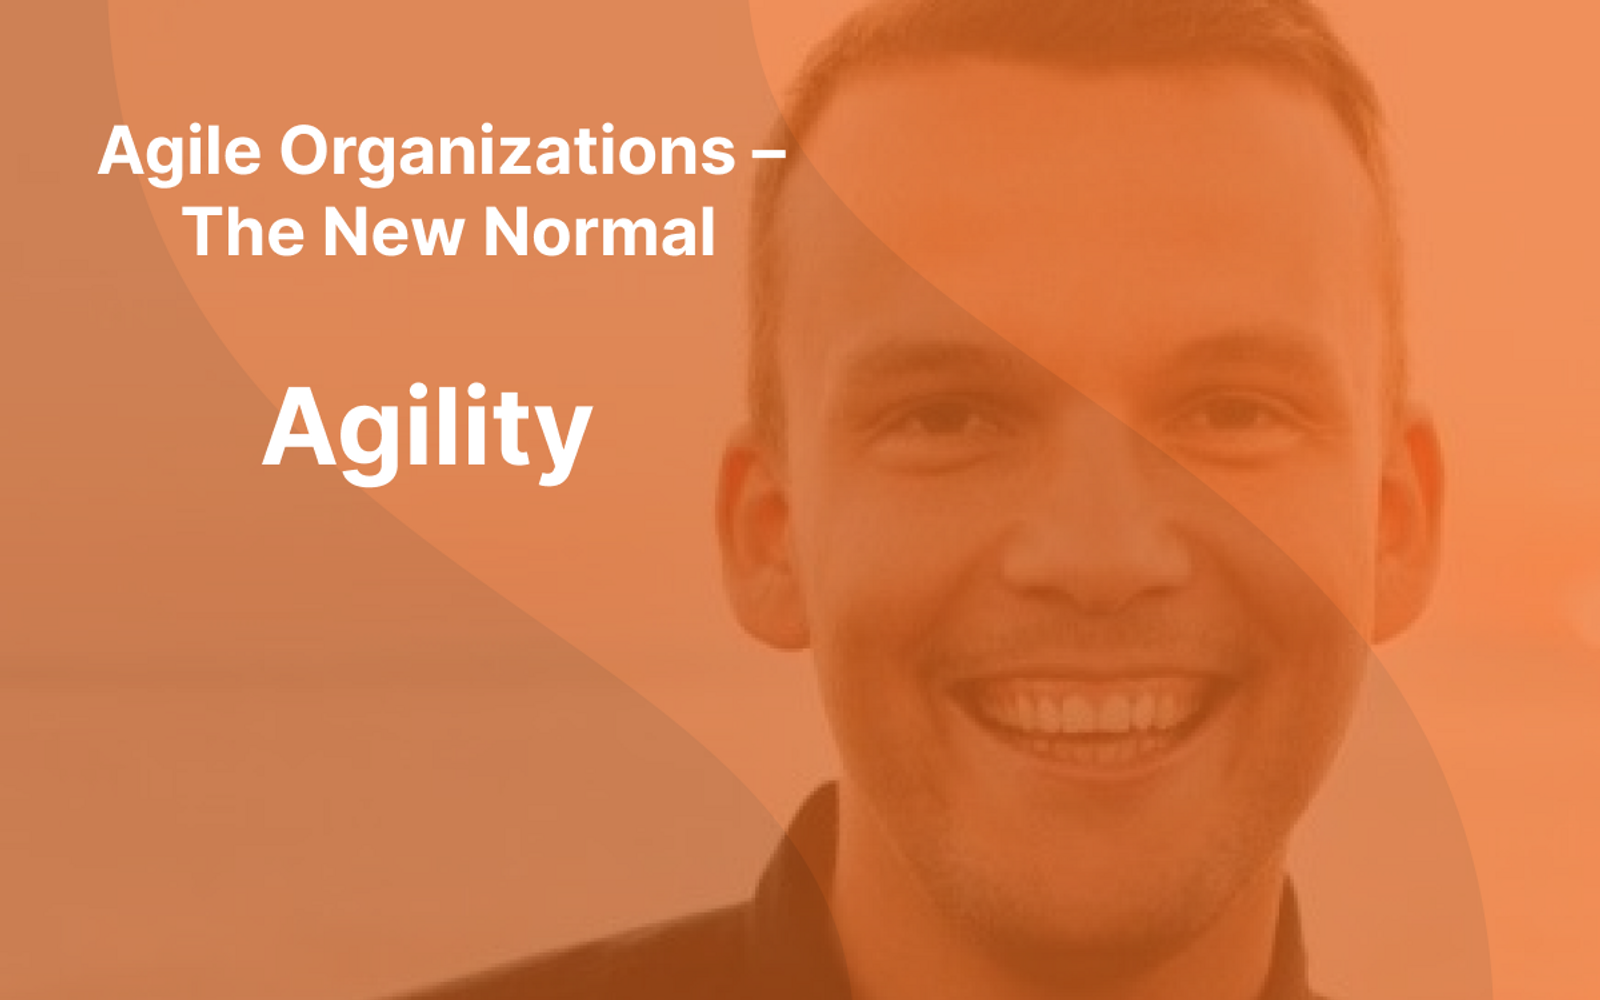 Picture of Sindre Suphellen with orange overlay and the text "Agile Organizations - The New Normal" and "Agility" written in white